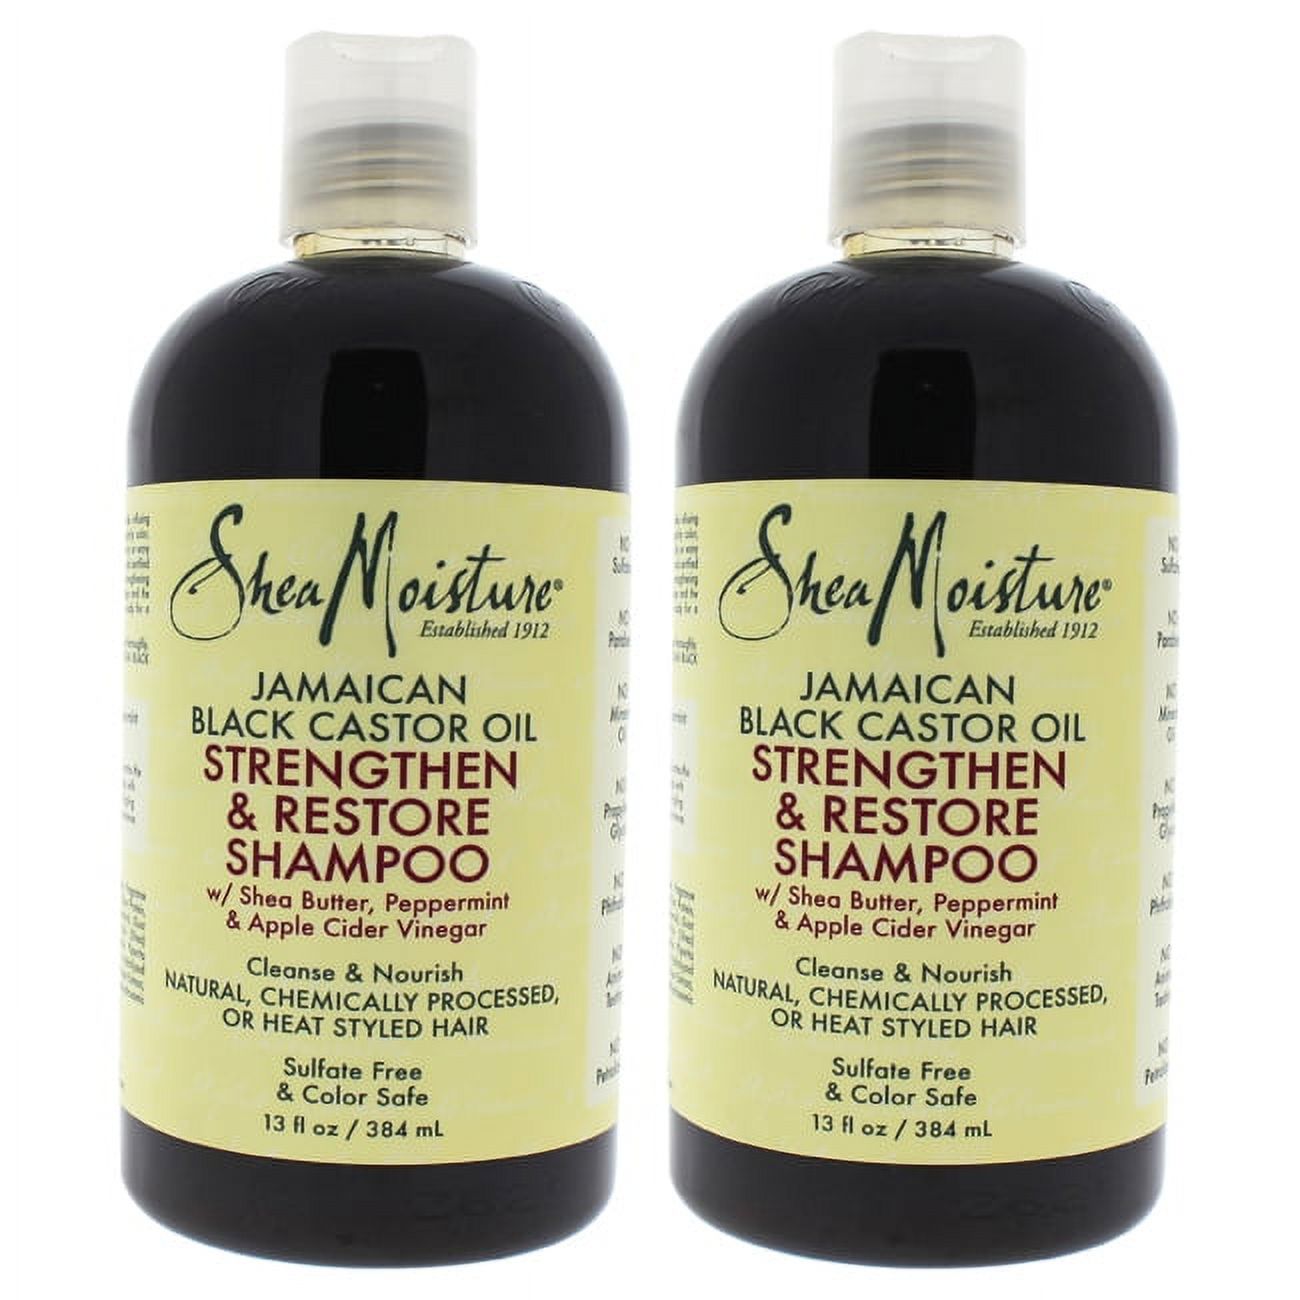 Jamaican Black Castor Oil Strengthen, Grow And Restore Shampoo by for Unisex - 13 oz Shampoo - Pack of 2 - image 1 of 5